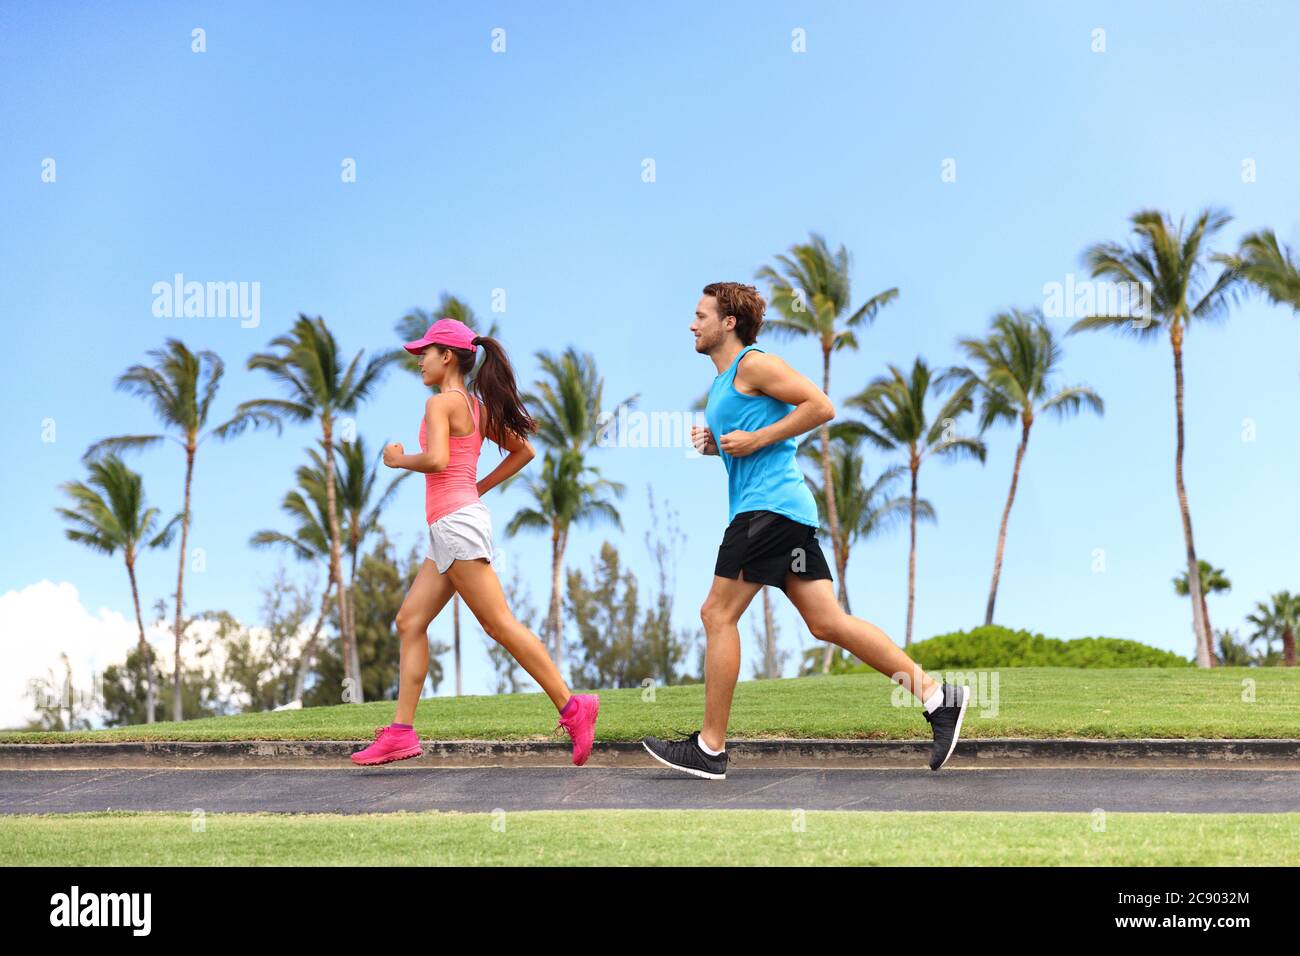 Sport fitness couple lifestyle. Healthy people running together in summer park outdoor, runners training cardio Stock Photo